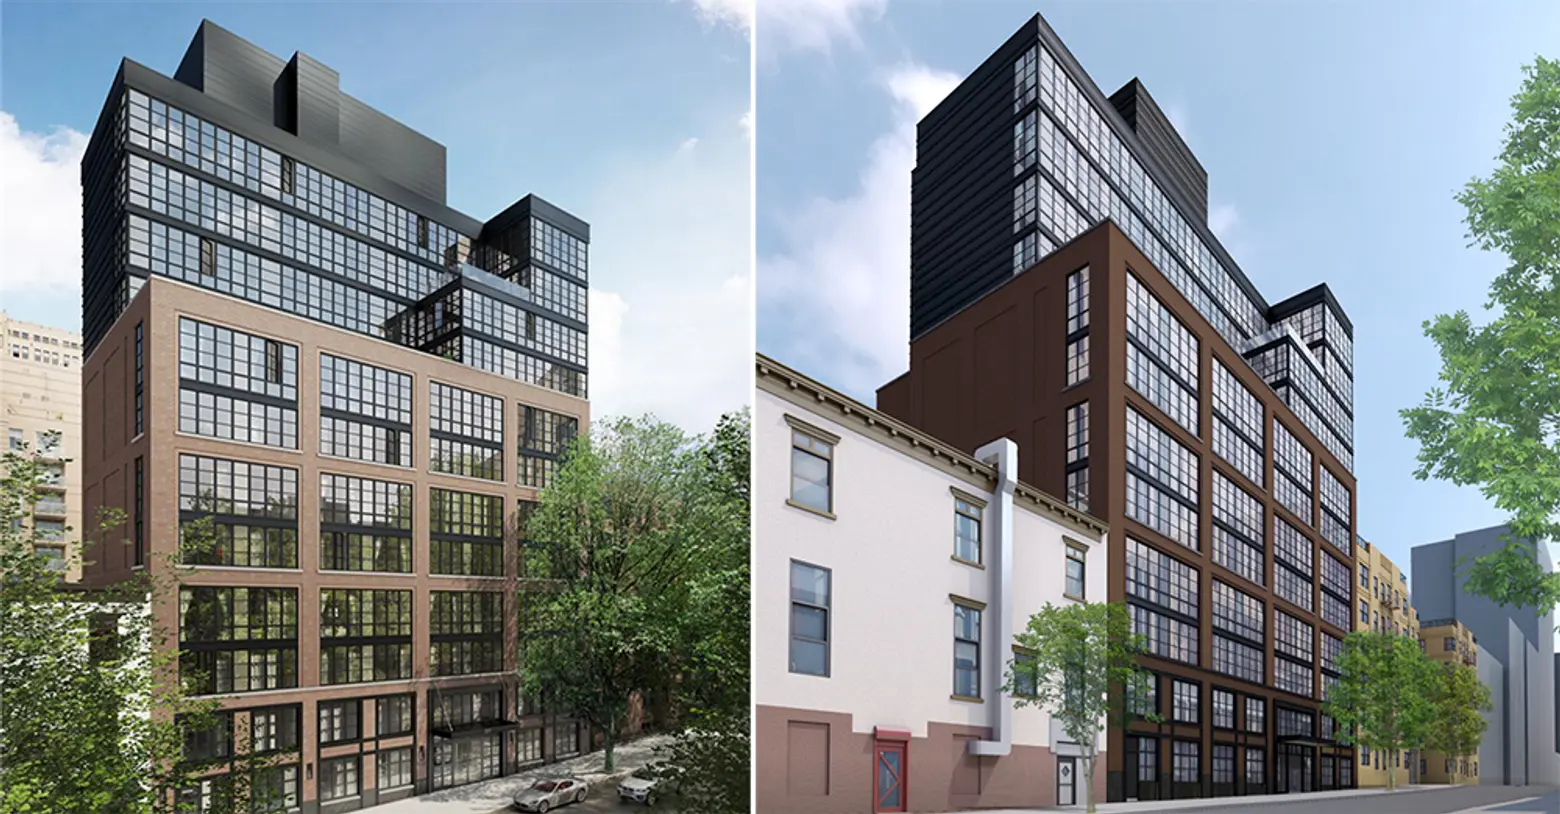 Chelsea’s Seymour Condominium Tops Out with More Than Half of the Units in Contract